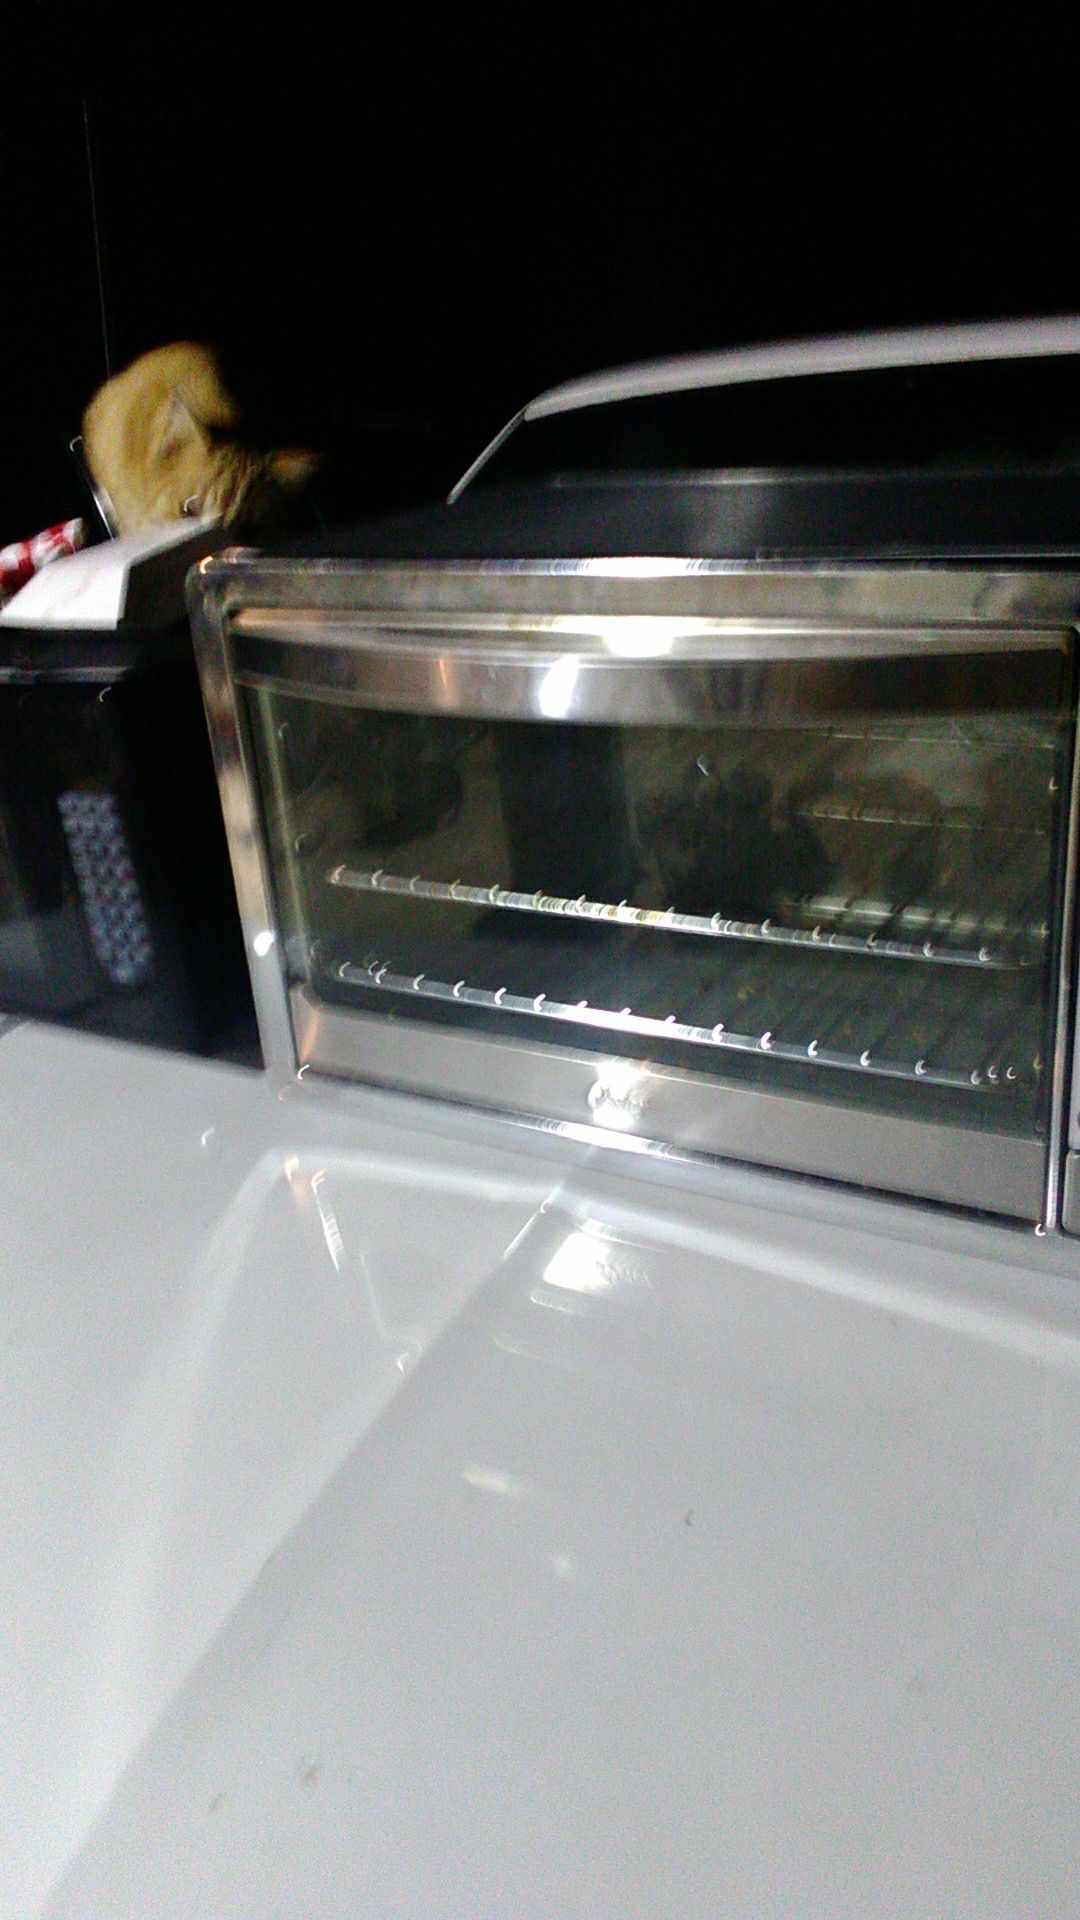 Pester toaster large countertop oven and large GE microwave